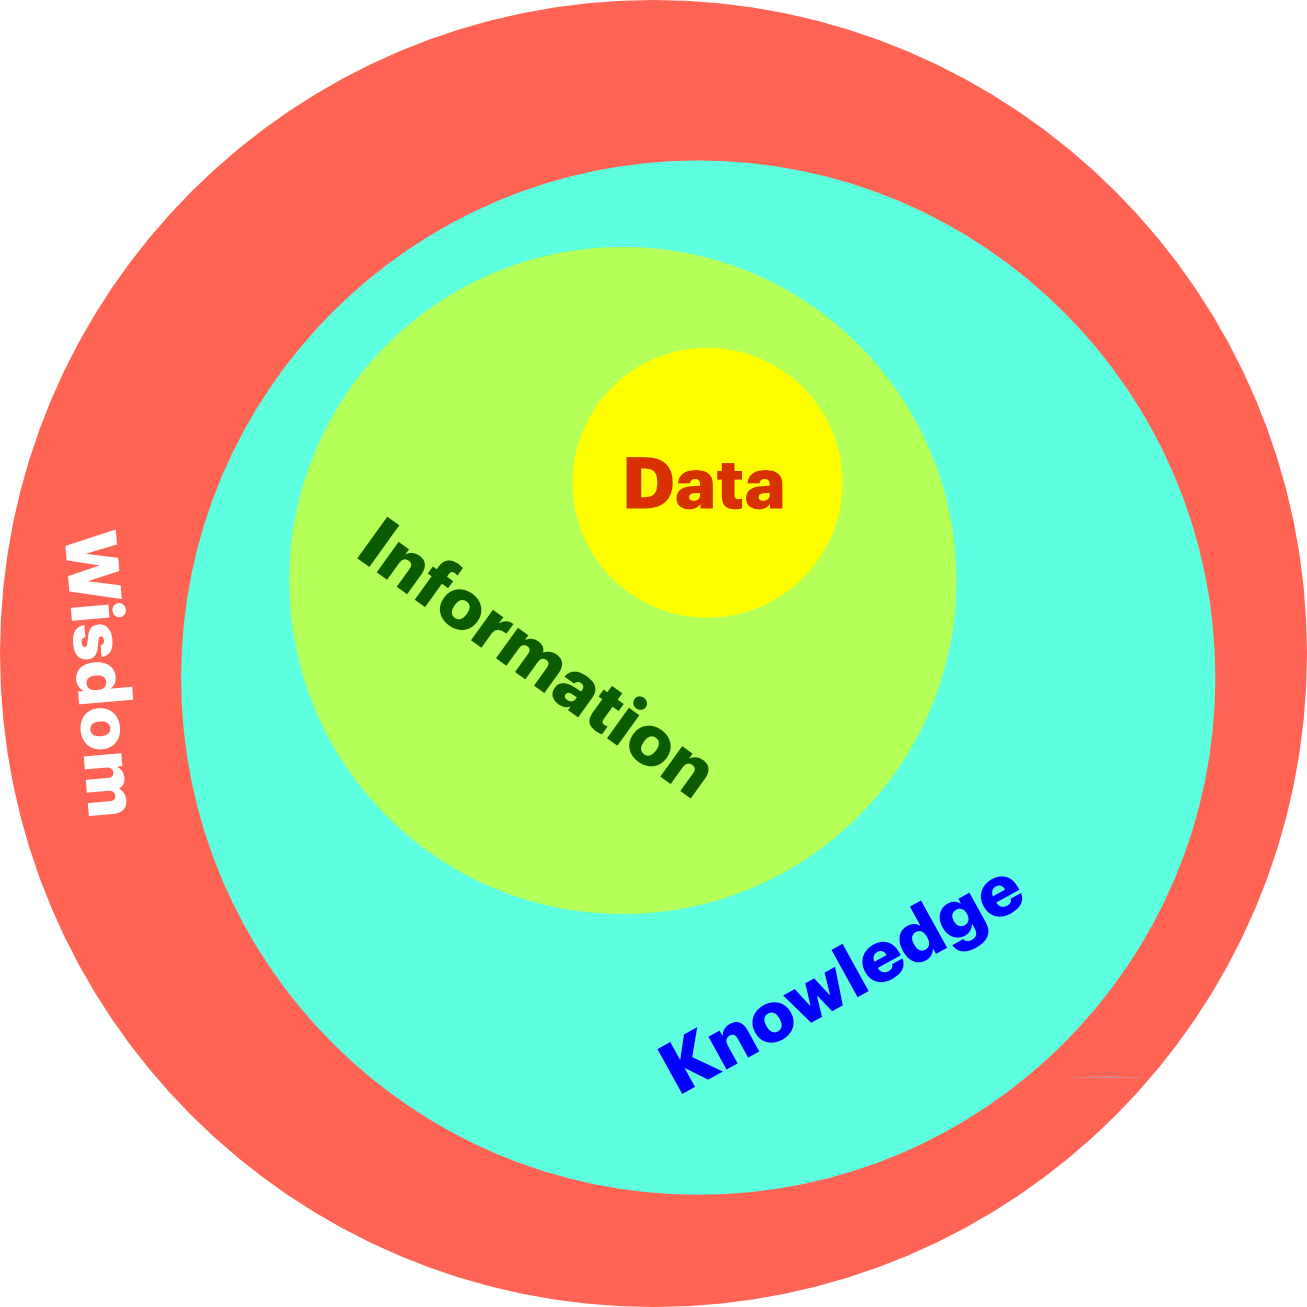 A visualisation of how data becomes information which becomes knowledge which becomes wisdom.